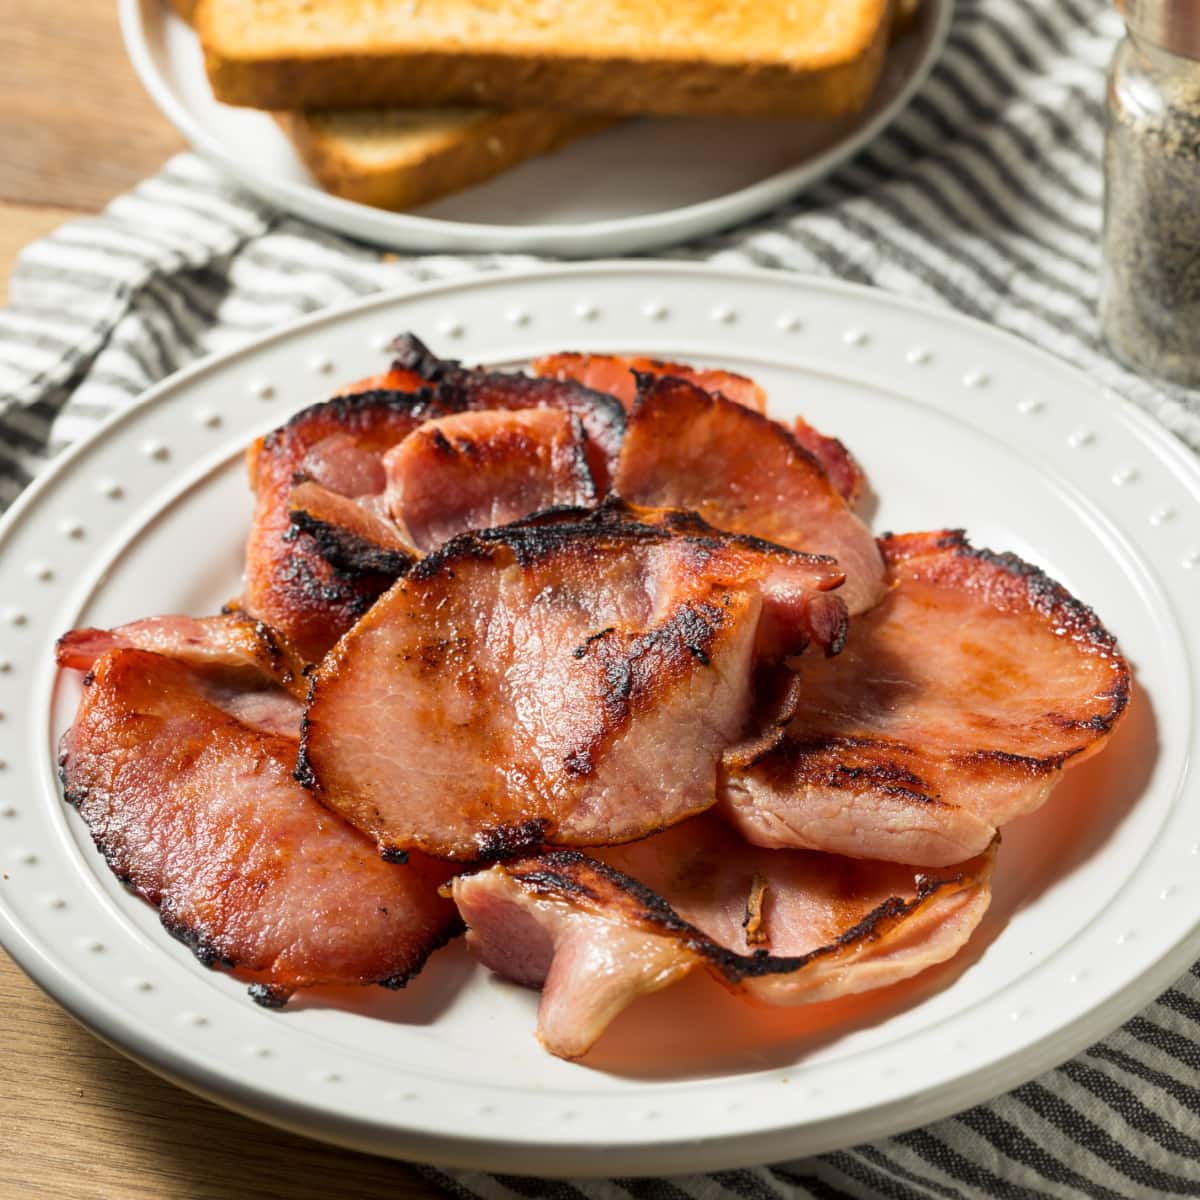 Canadian Bacon on Plate With Toasted Bread